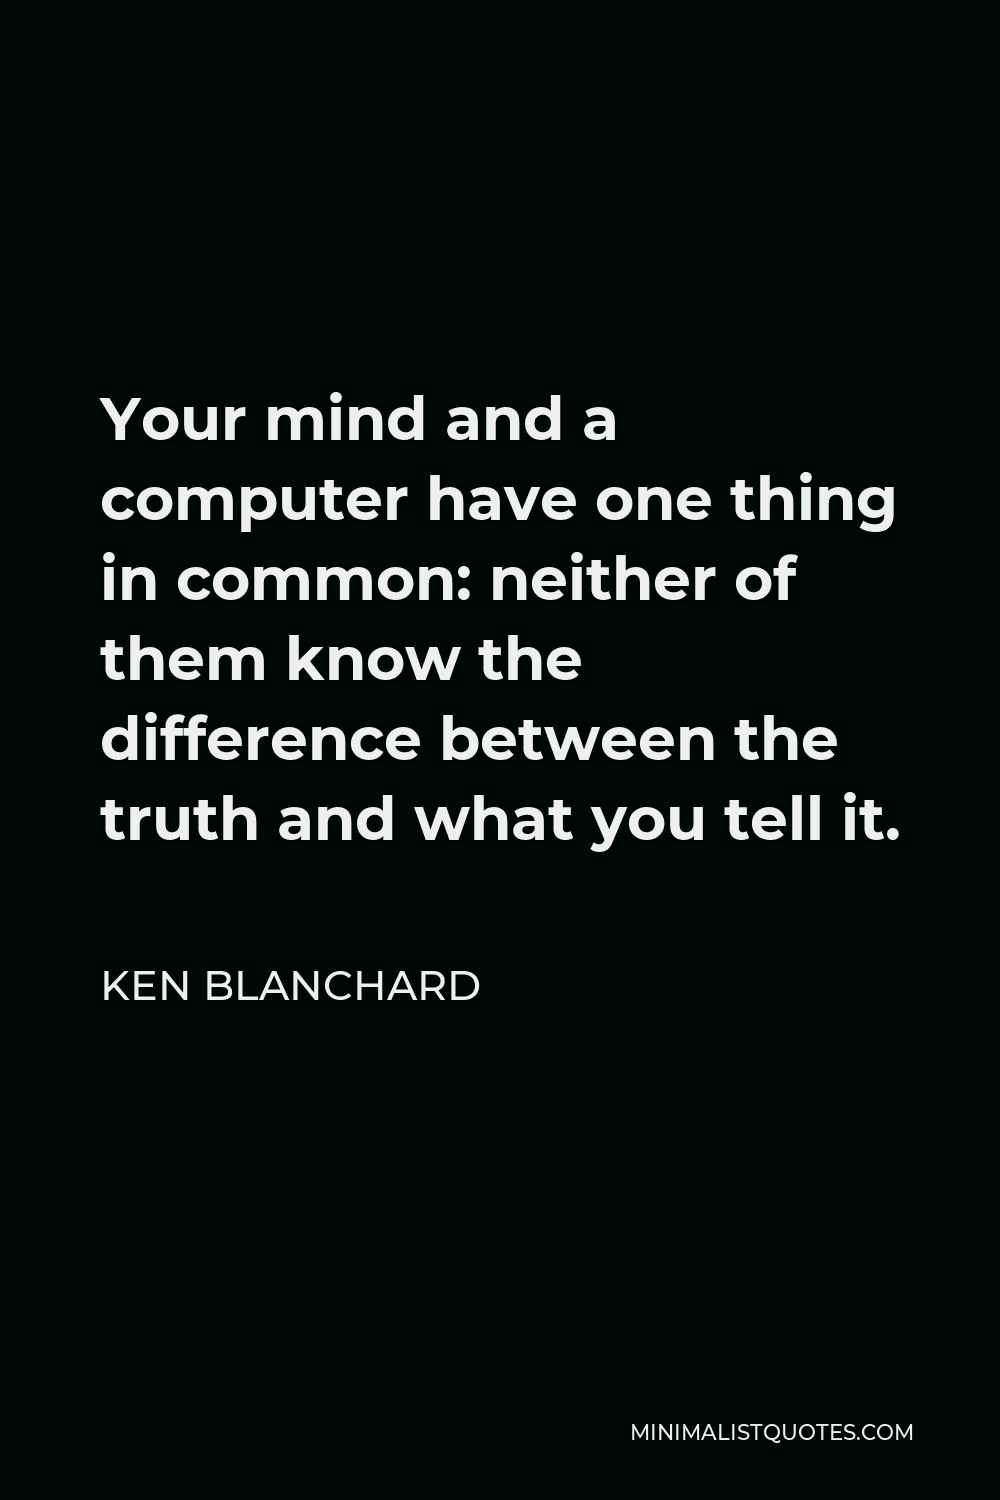 Ken Blanchard Quote - Your mind and a computer have one thing in common: neither of them know the difference between the truth and what you tell it.